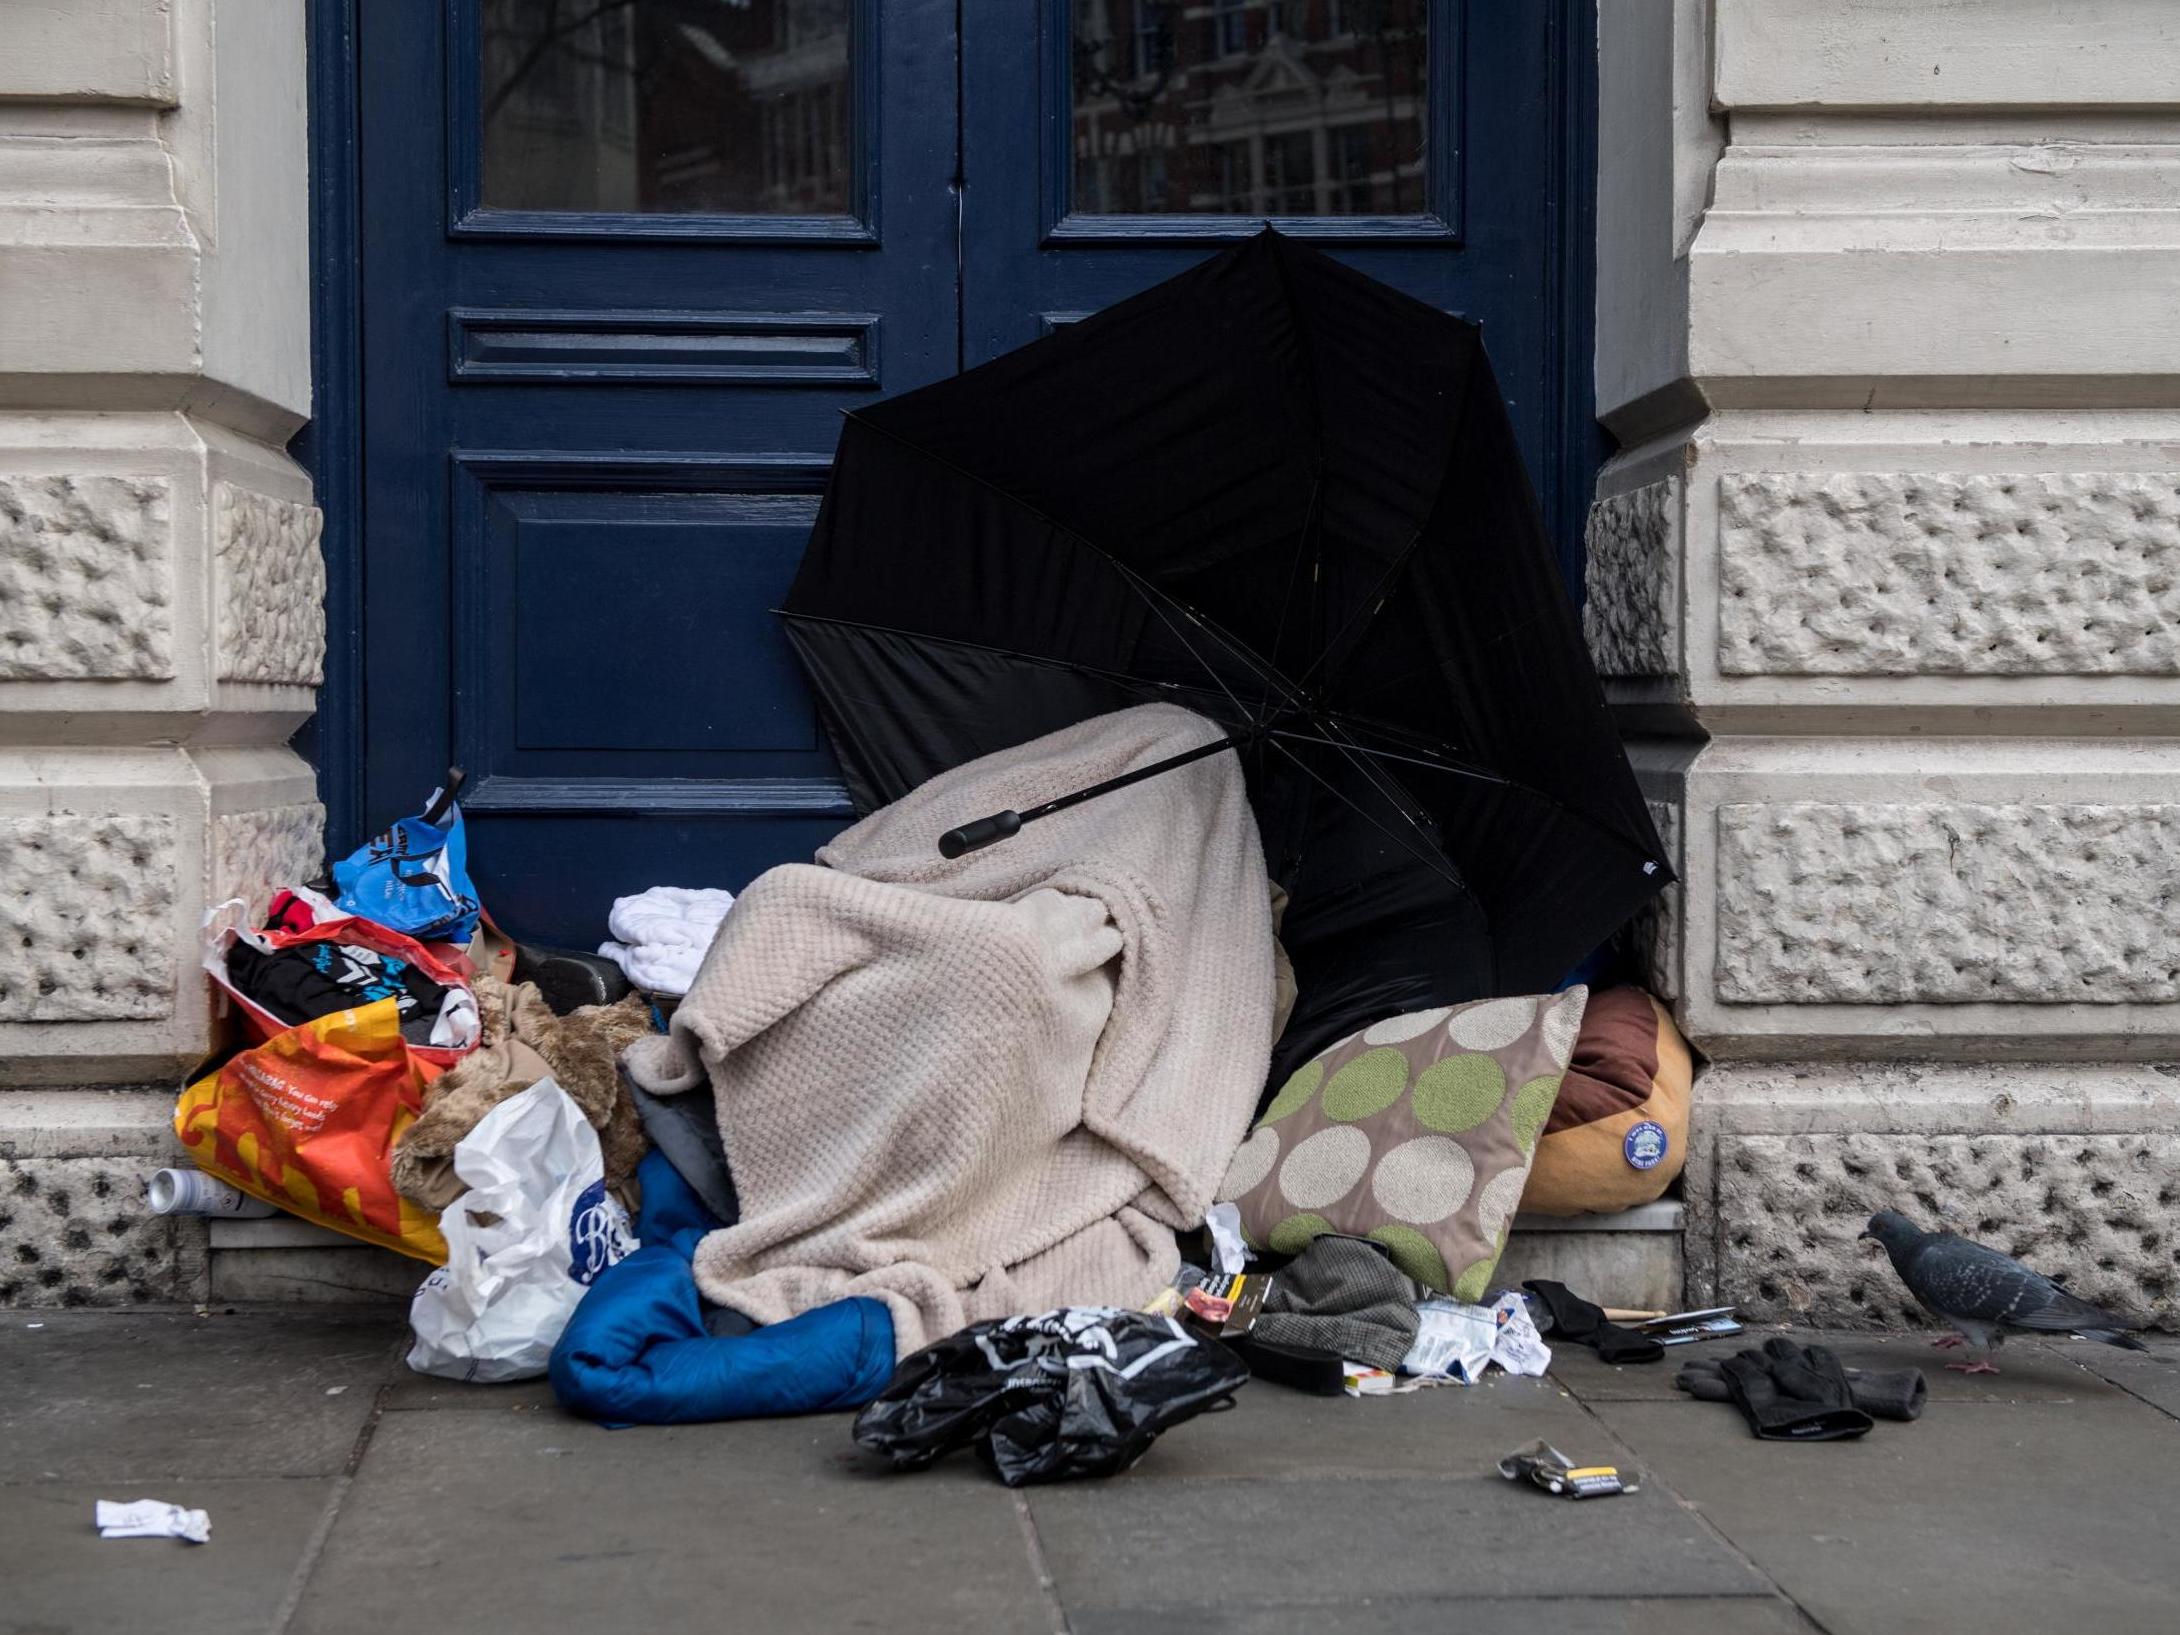 The Home Office announced last month that rough sleeping would become grounds to cancel or refuse a person’s right to be in the UK under the new immigration rules, due to come into effect on 1 January